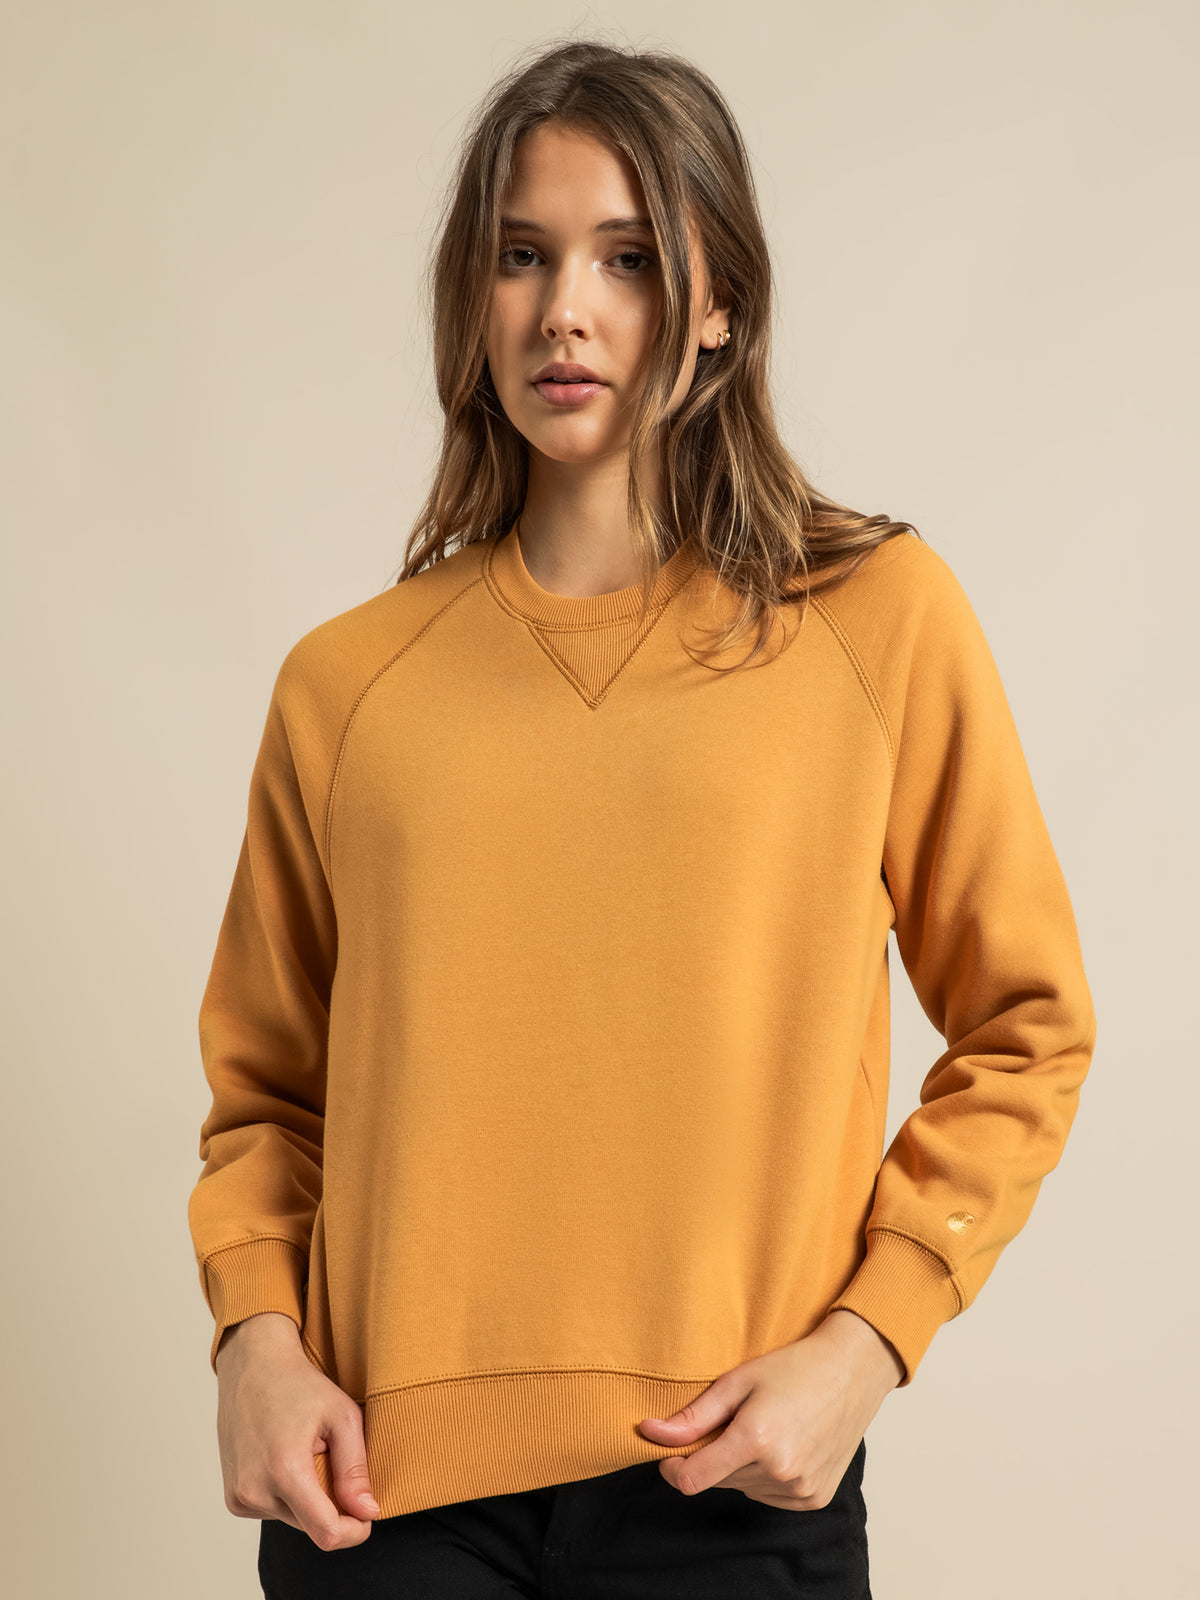 Chase Sweatshirt in Gold